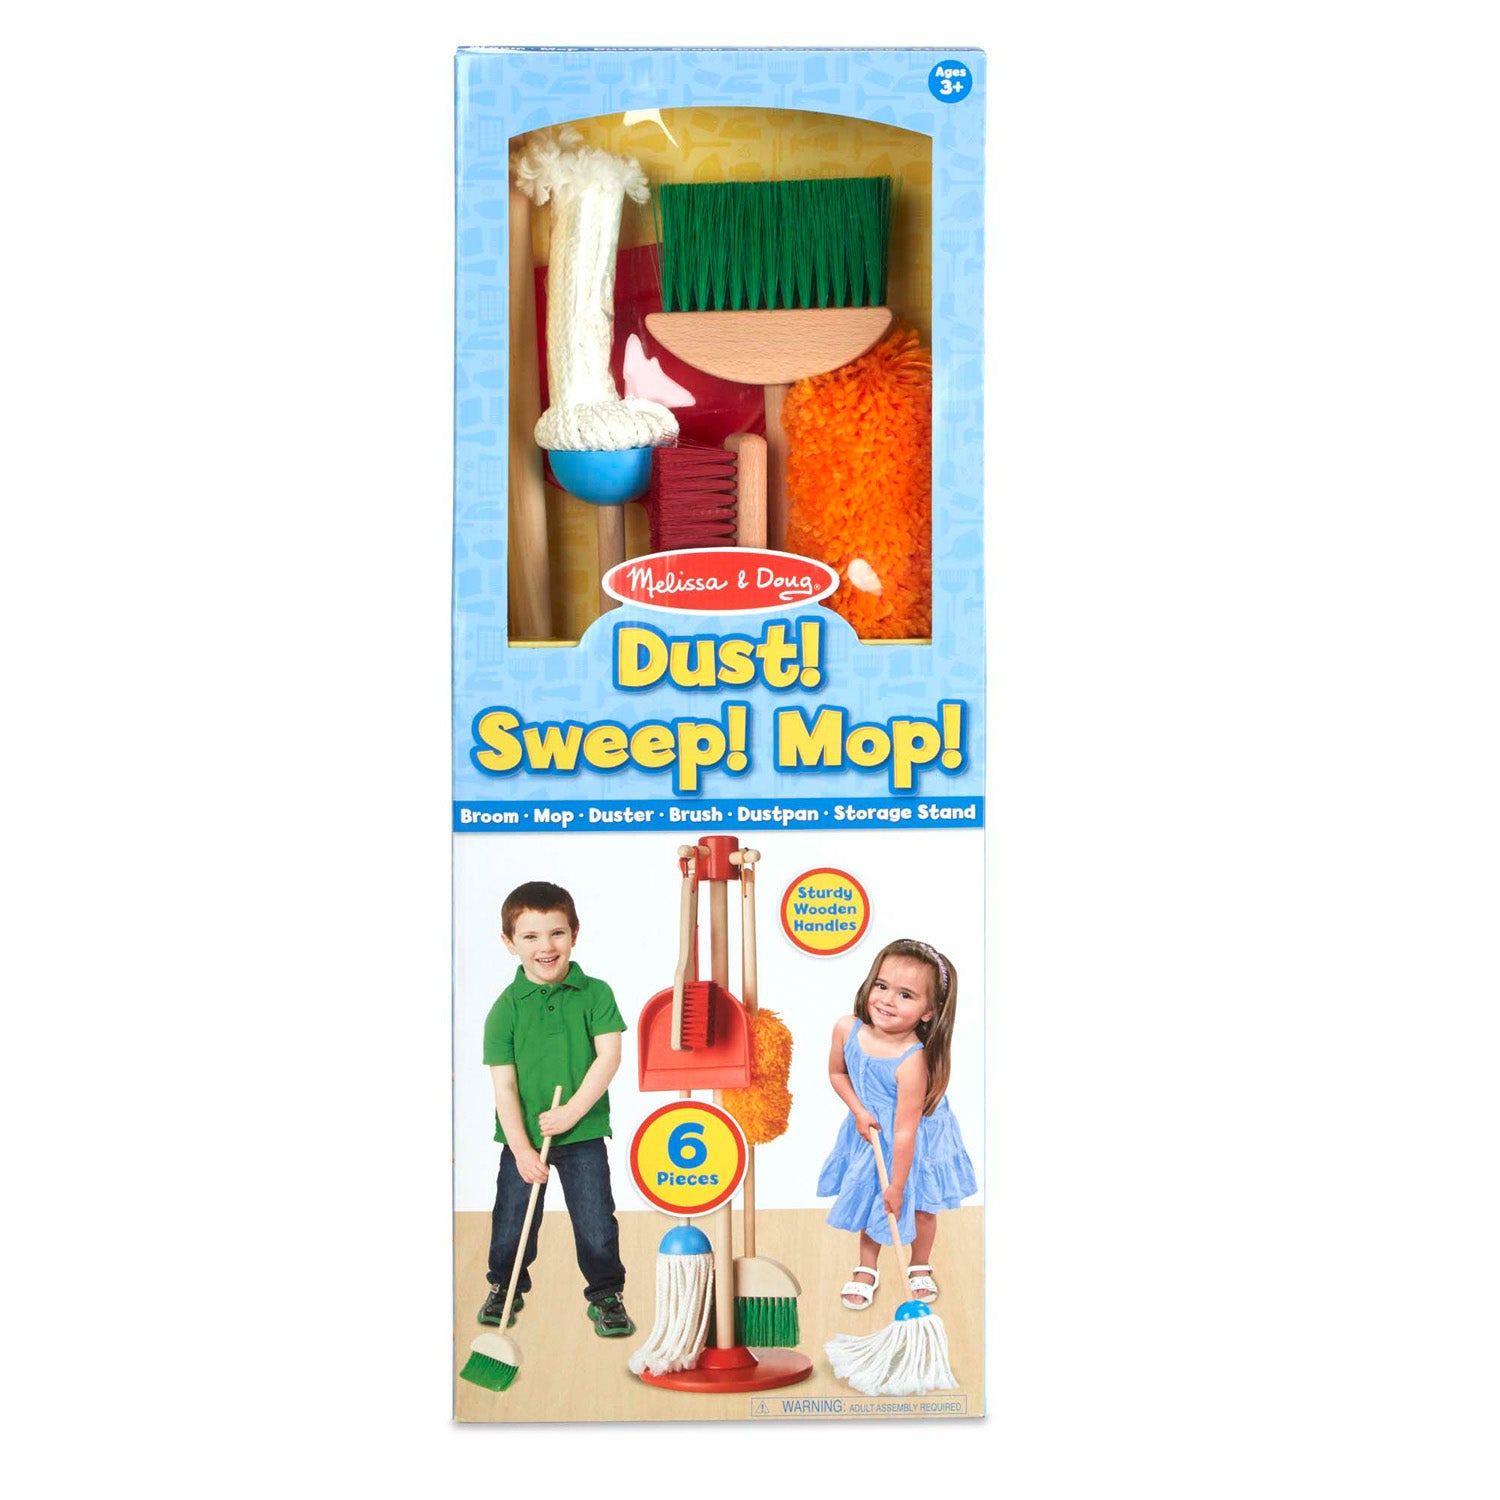 Kids Cleaning Set 4 Piece - Toy Cleaning Set Includes Broom, Mop, Brush,  Dust Pan, - Toy Kitchen Toddler Cleaning Set is A Great Toy Gift for Boys &  Girls - Original 